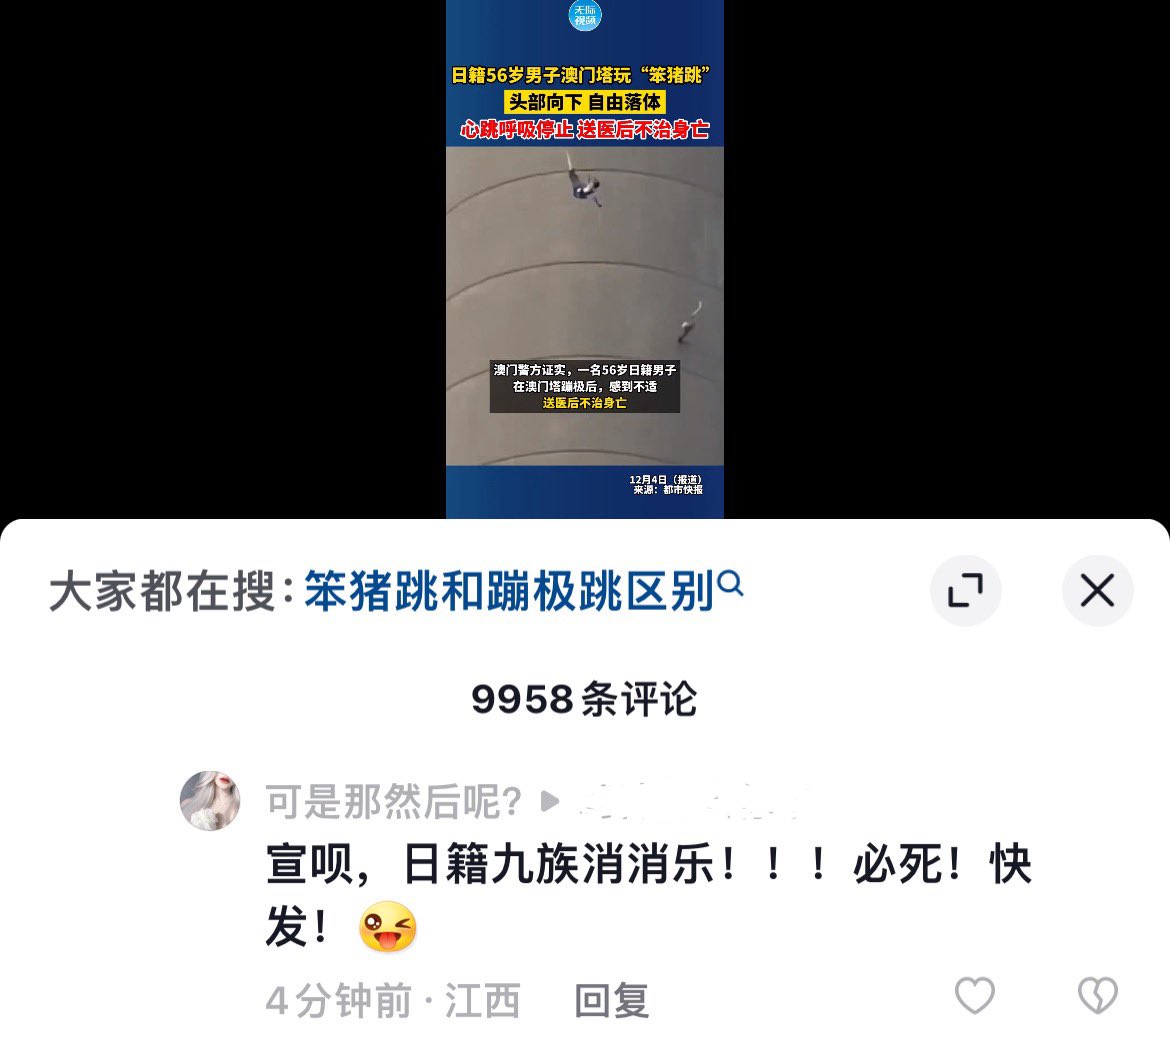 #TheGreatTranslationMovement #Japan #Chinesetiktok Comments in Douyin（ChineseTiktok）under the news of an accident by a Japanese citizen.